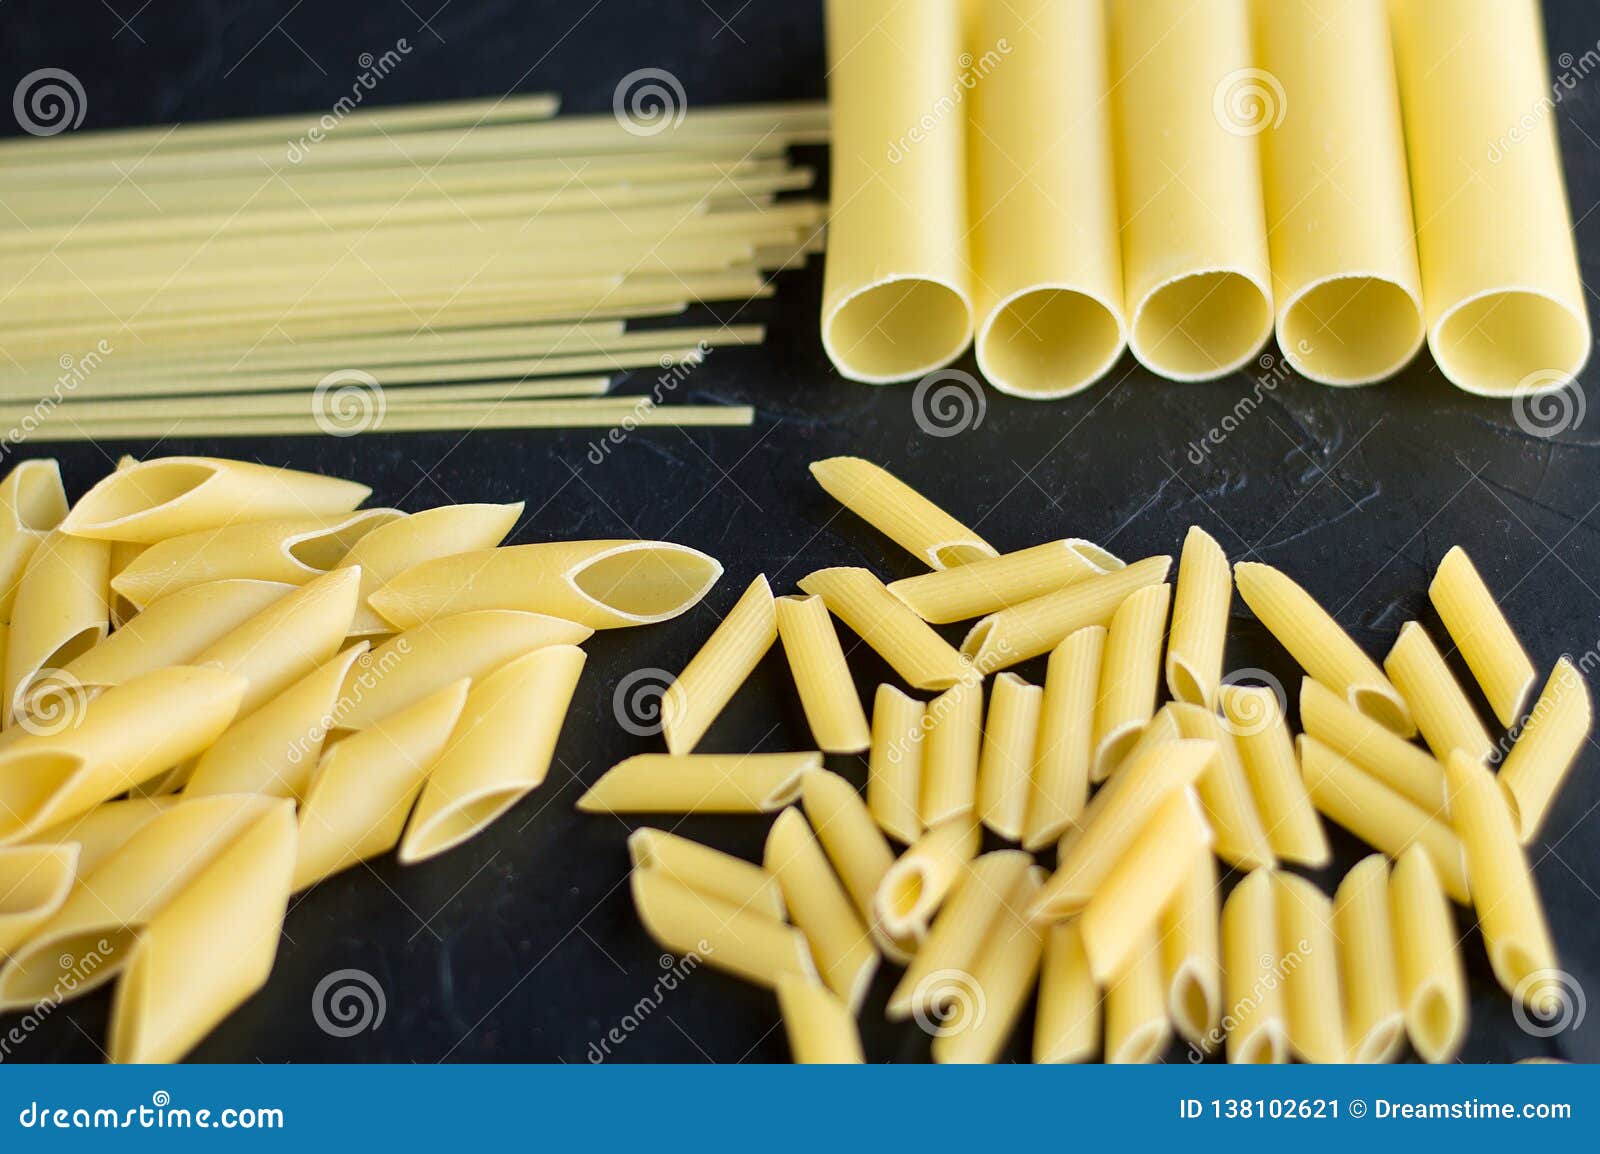 Different Types of Pasta Penne Pennoni Cannelloni Noodles Stock Image -  Image of healthy, fusilli: 138102621